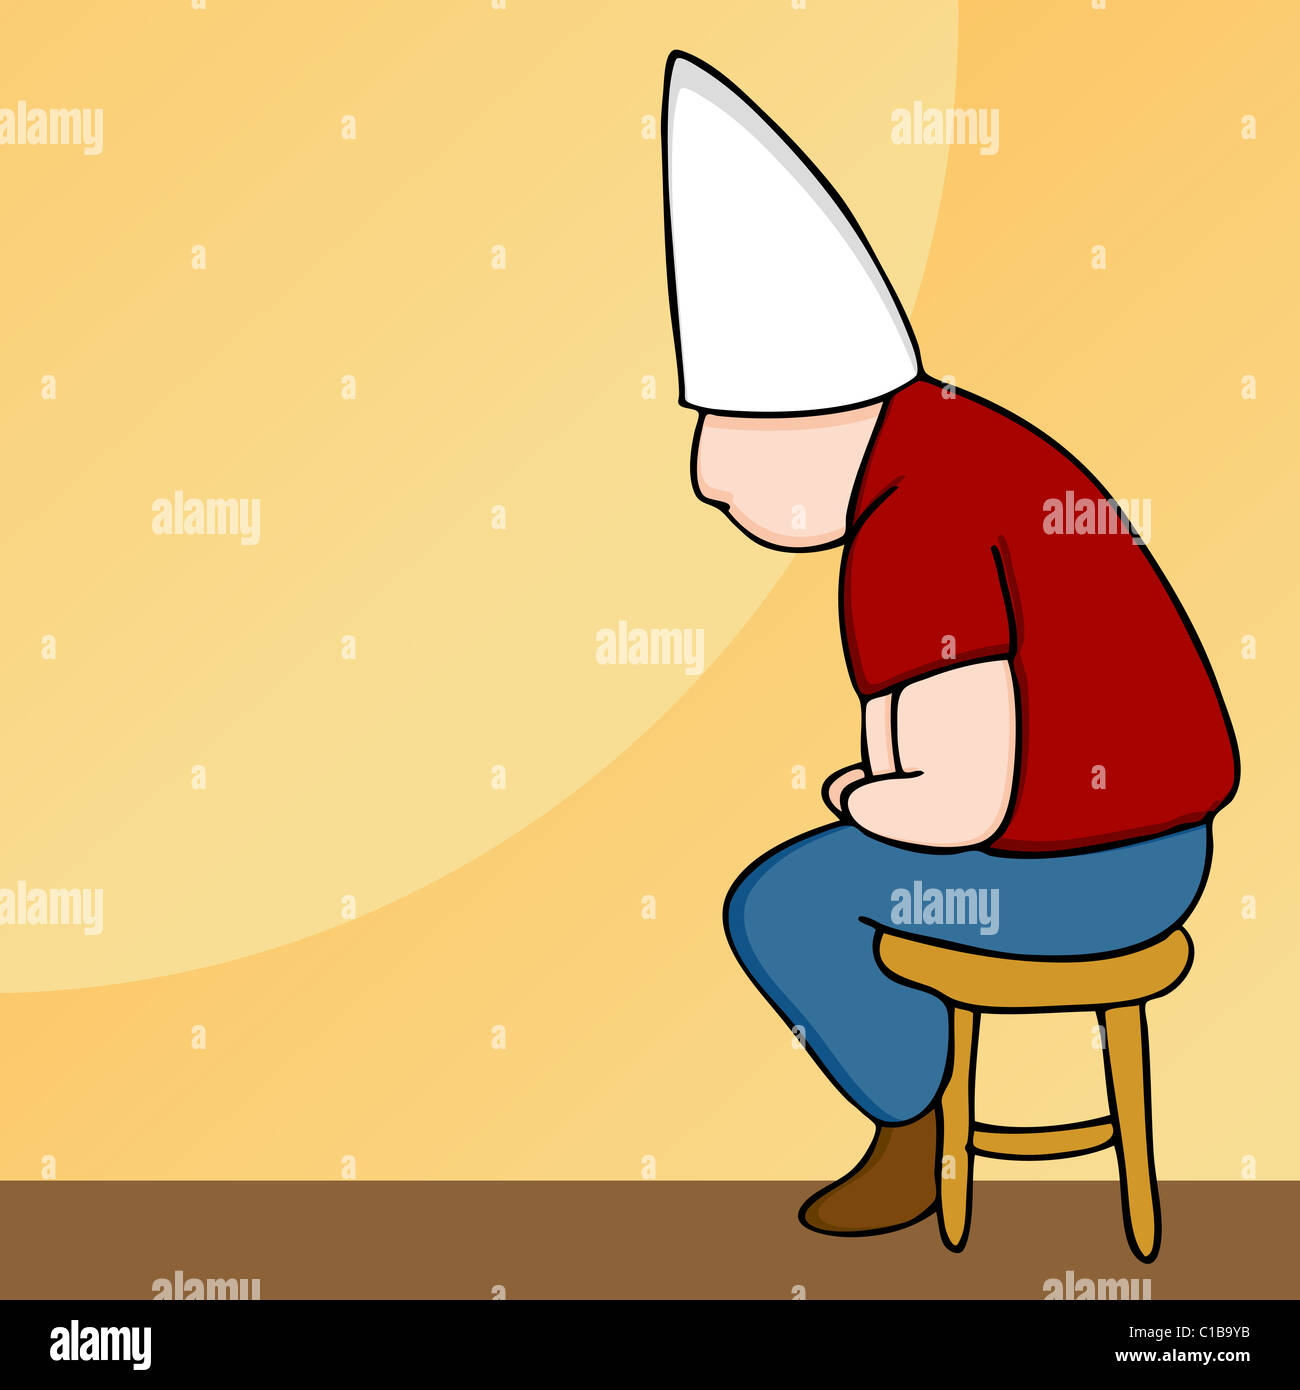 An image of a man wearing a dunce cap sitting on a stool. Stock Photo